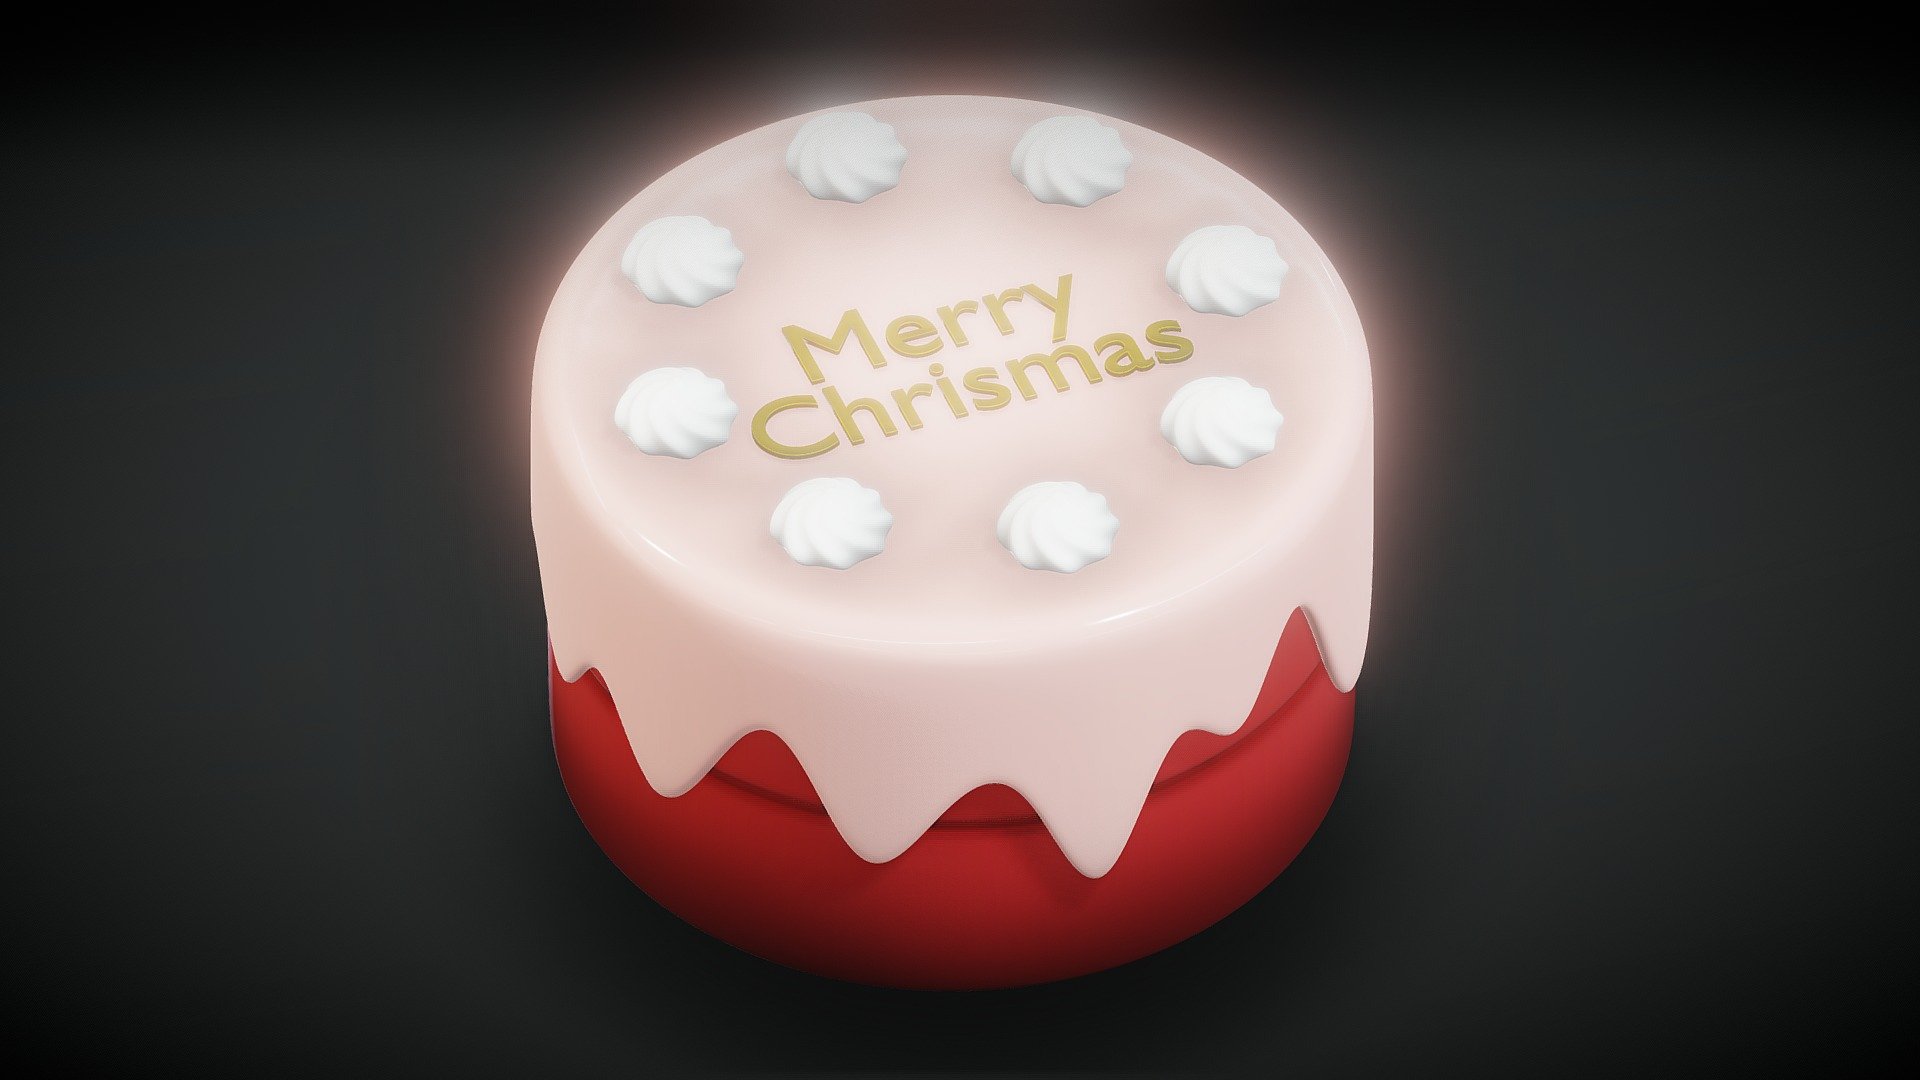 A little cake I made on a weekend to test some new features on the Blender 2.8 sculpting branch.
Hope you like it! - Cake - 3D model by redchristian 3d model